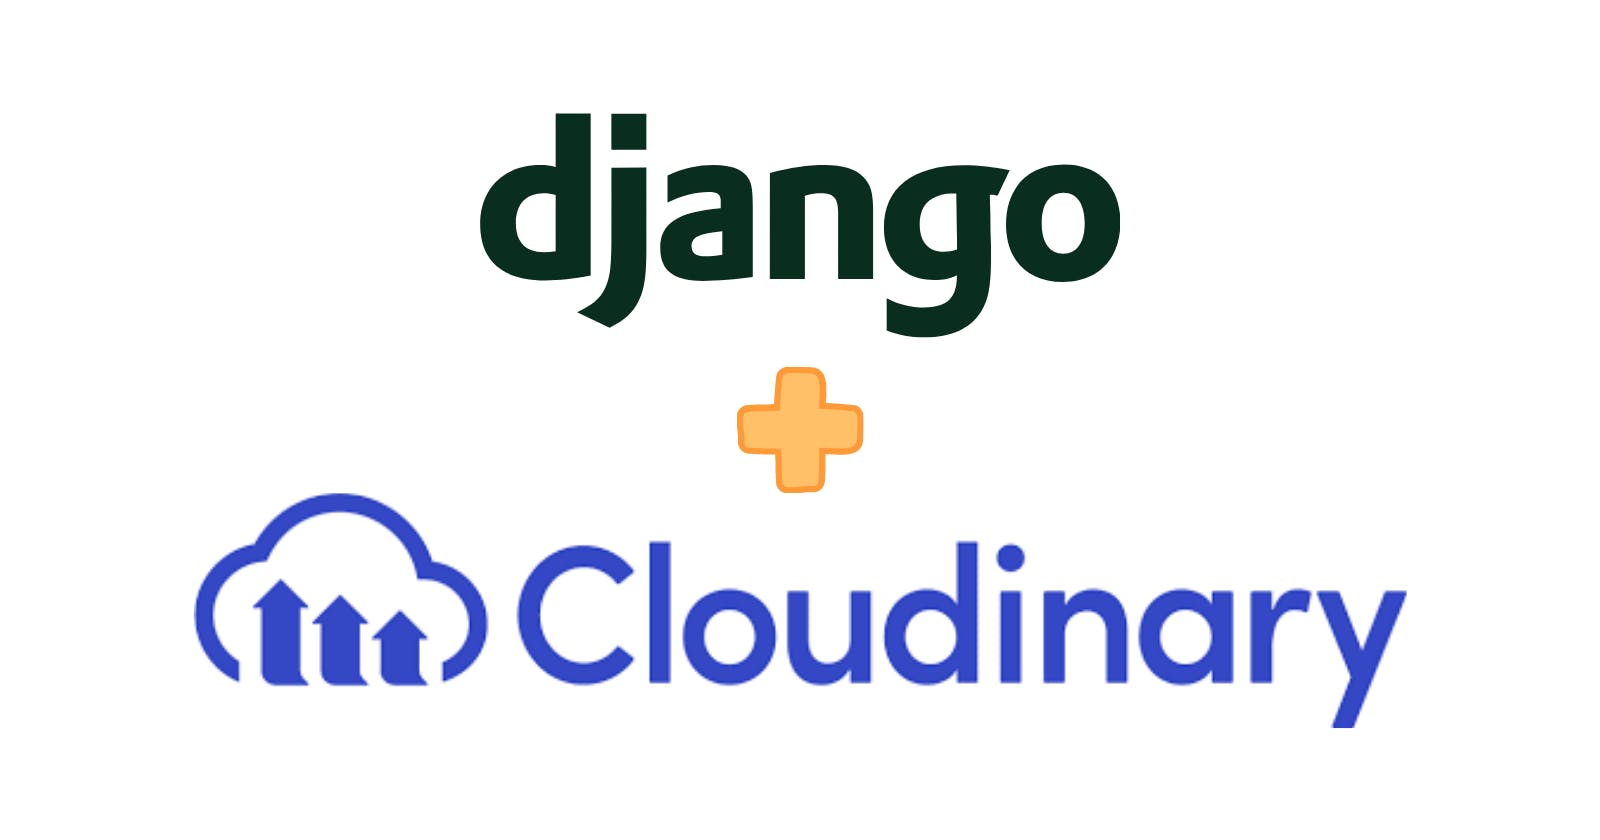 Let Cloudinary handle image uploads in your Django application.